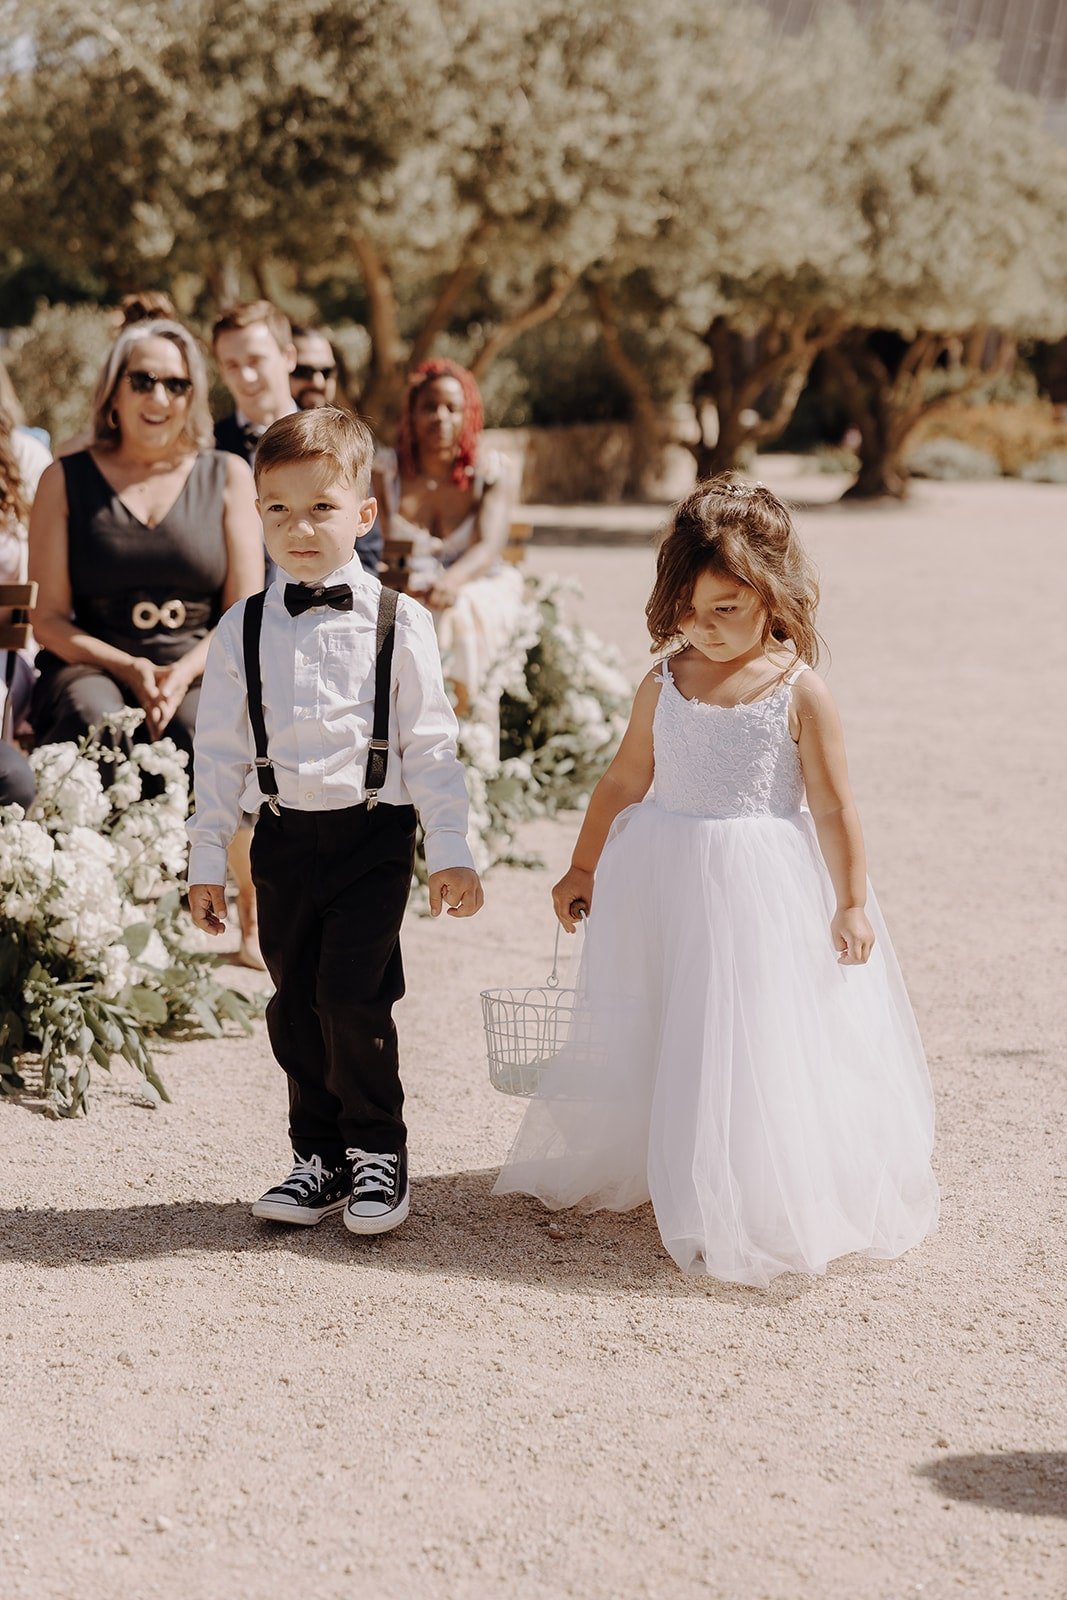 Flower girl and boy walk down the wedding aisle at Tuscan-style wedding in California